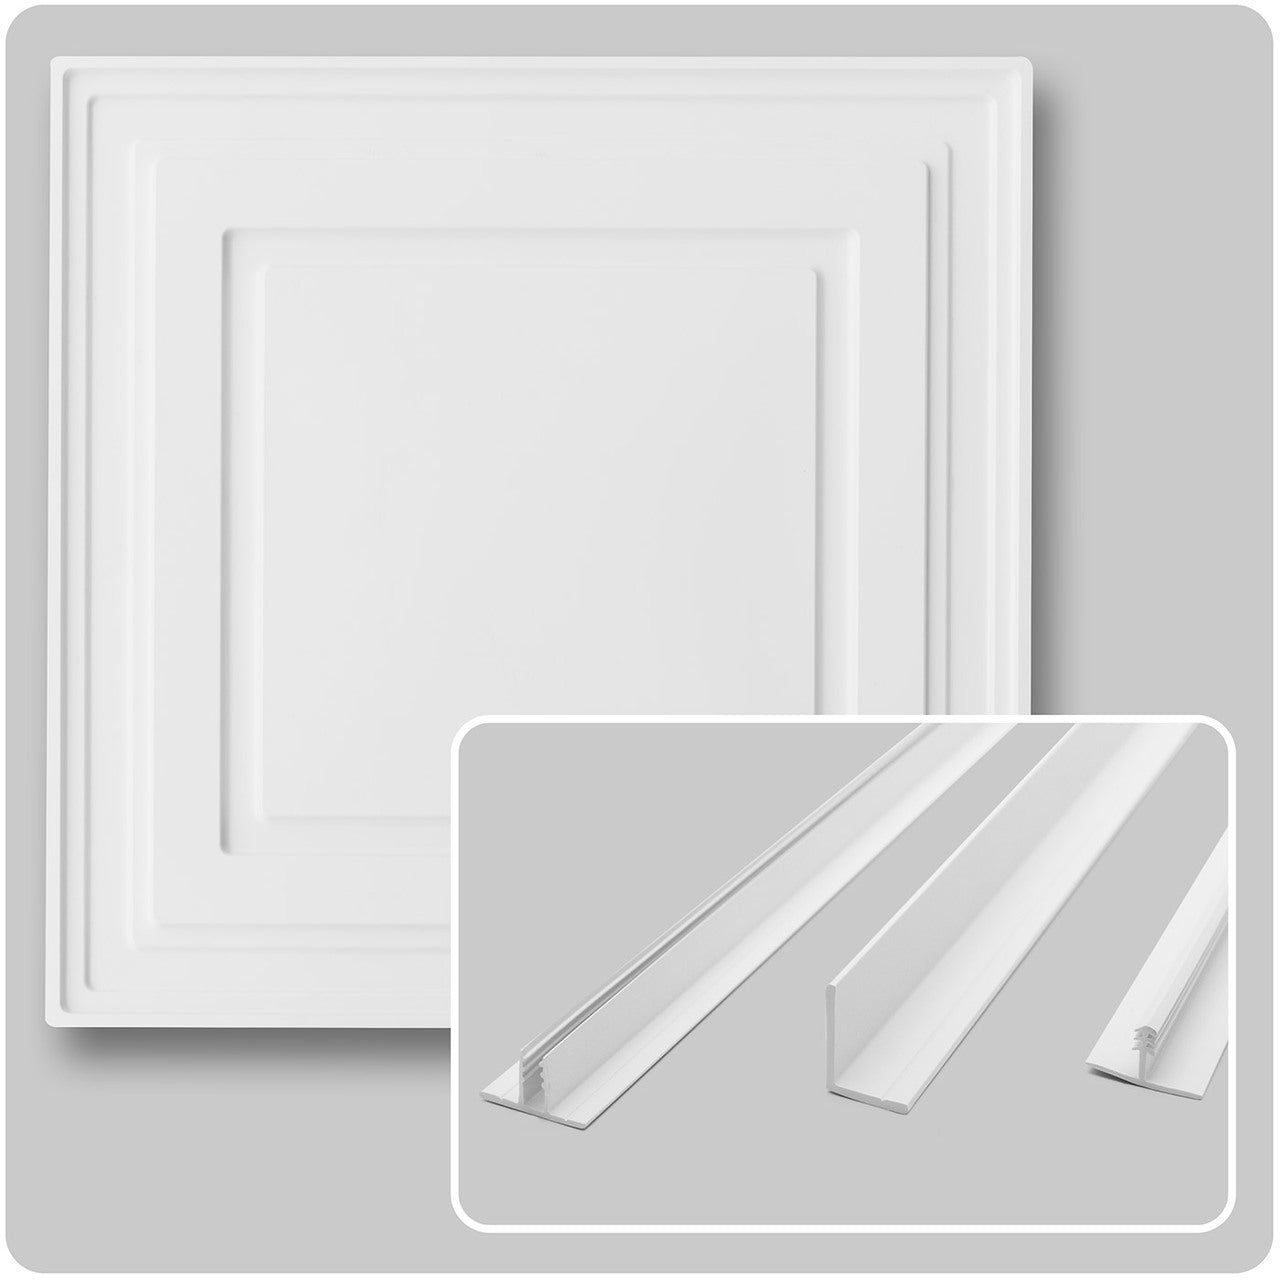 Complete White Ceiling Kit - Includes Ceiling Tiles